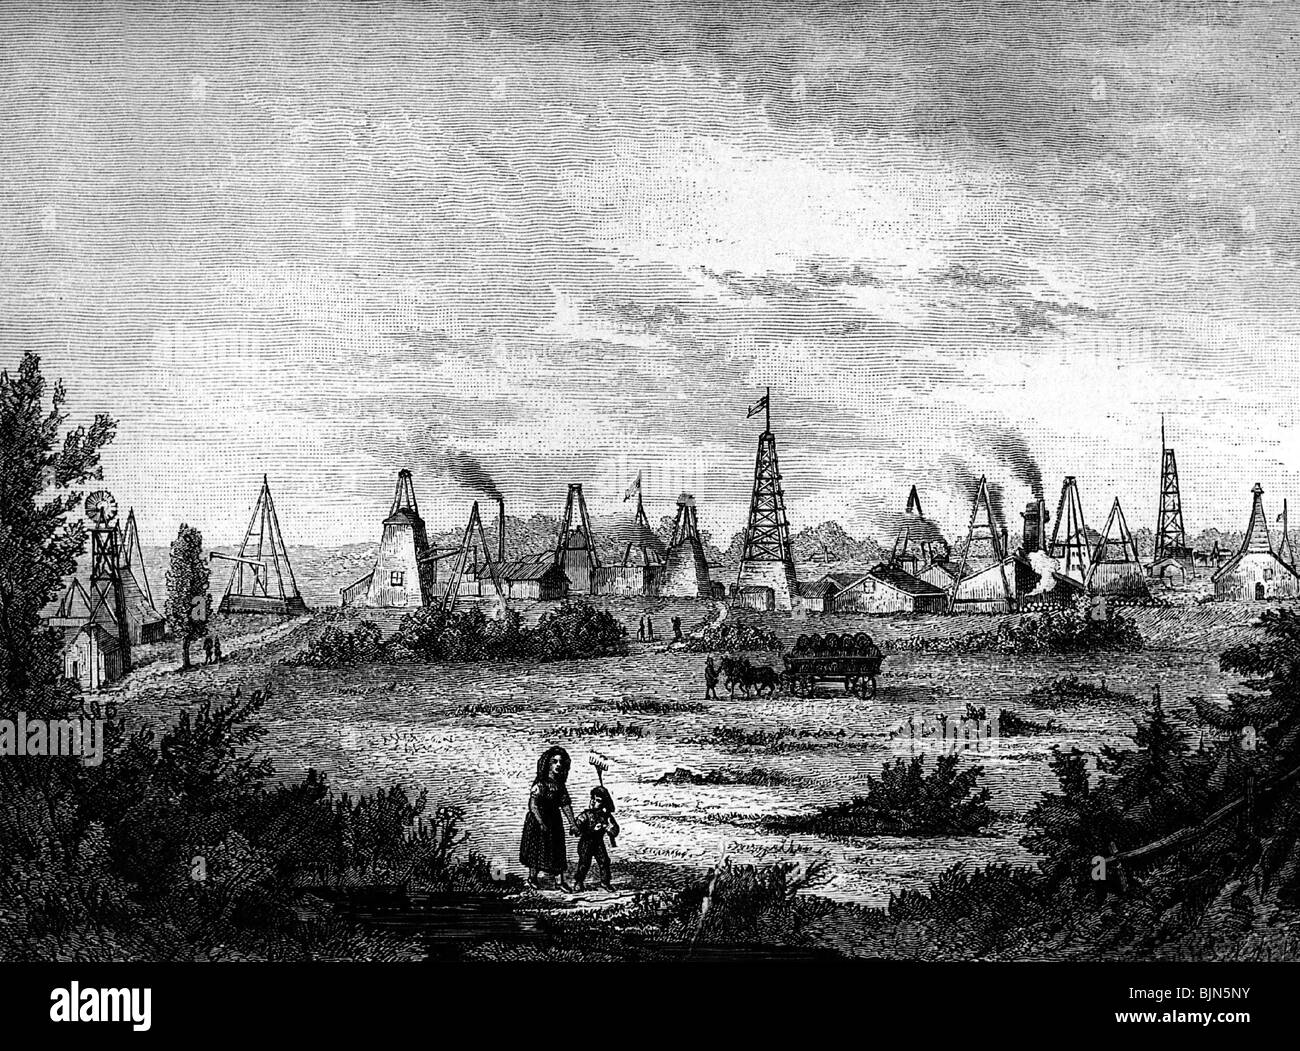 energy, oil, drilling, near Oehleim / Peine, wood engraving, circa 19th century, historic, historical, oil spring, oil well, oil springs, oil wells, shaft tower, production derrick , shaft towers, production derricks, crude oil, crude naphtha, raw oil, base oil, rock oil, crude petroleum, raw material, raw materials, crude materials, industry, power generation, production, fossil, petrified, fuel tank, oil tank, fuel tanks, oil tanks, people, Stock Photo